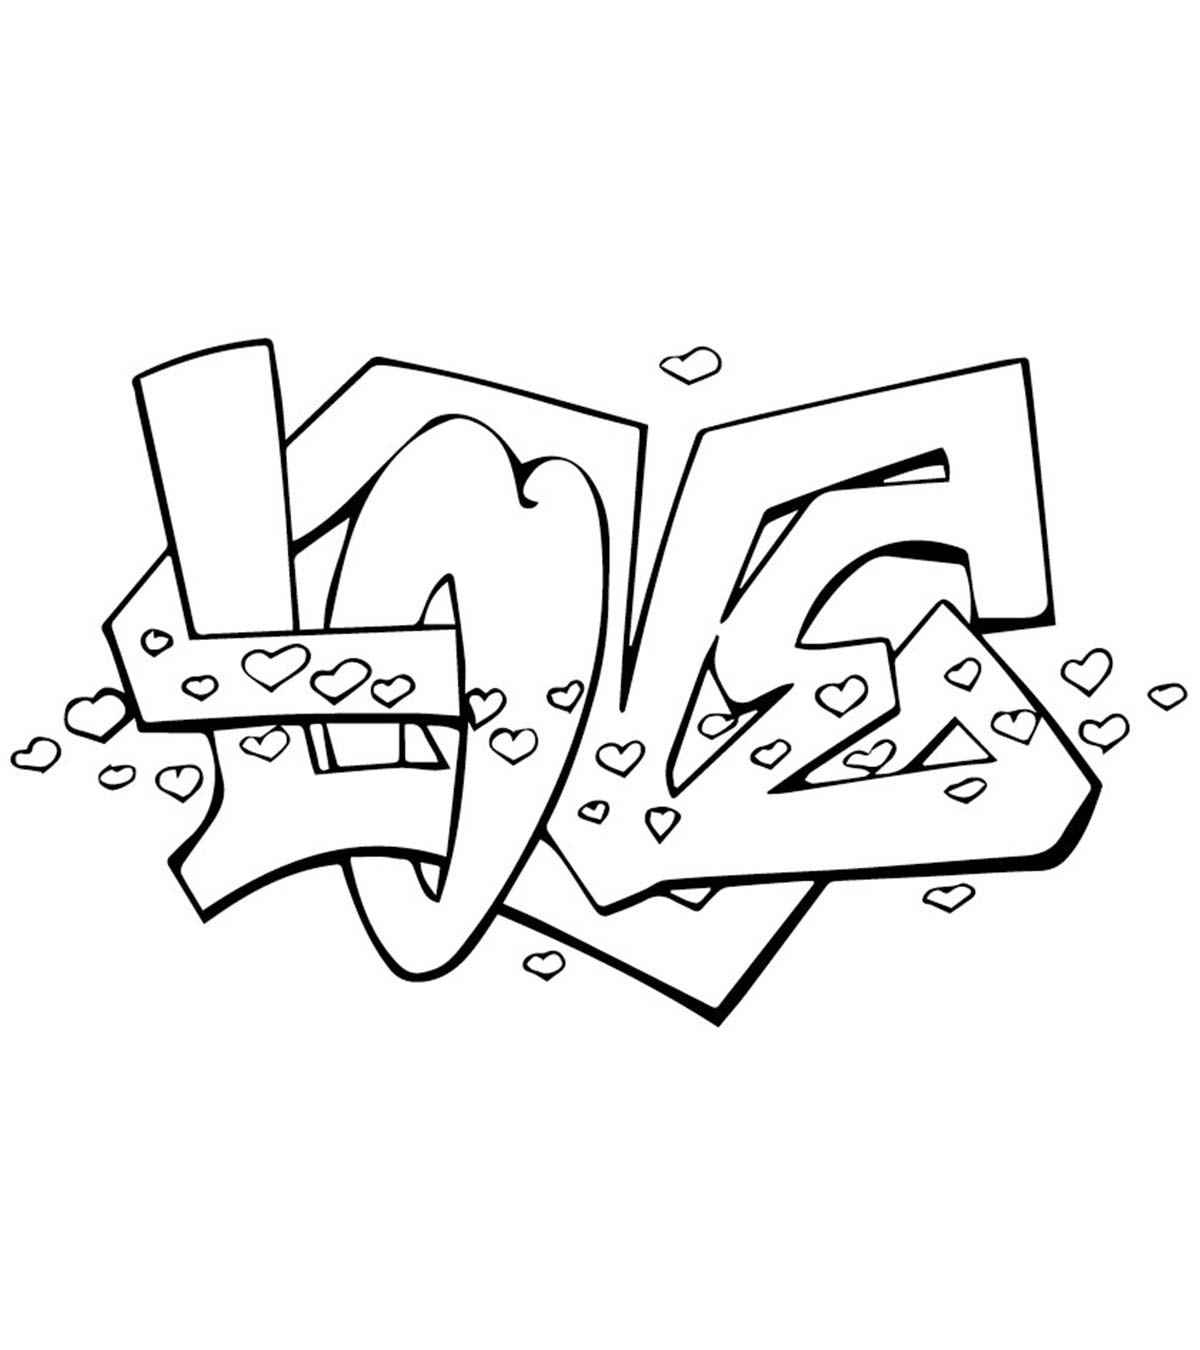 Top 10 Graffiti Coloring Pages For Your Little Ones